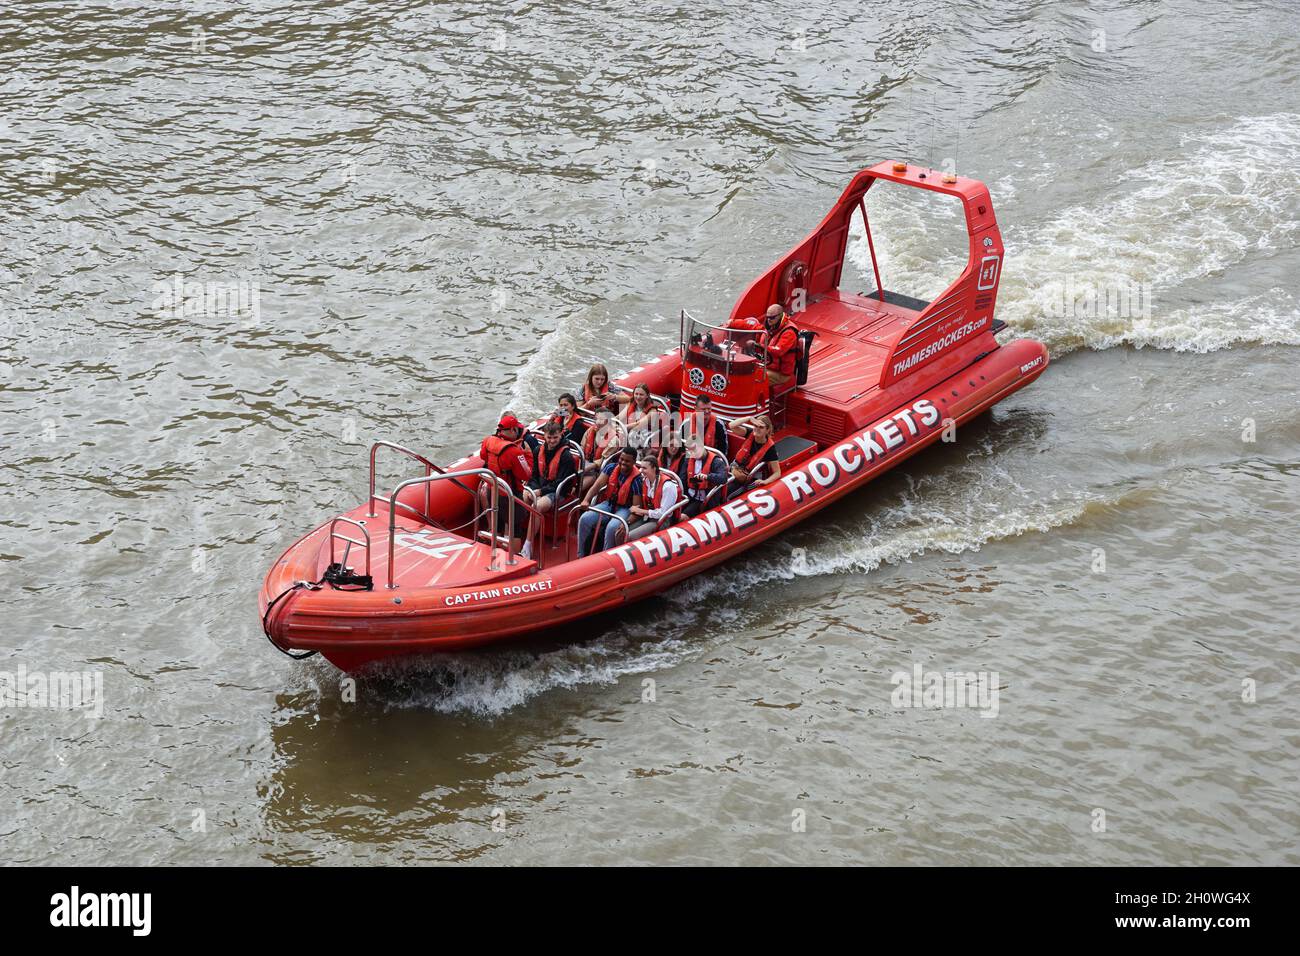 Thames Rockets high speed rigid inflatable boat (RIB) with tourists on the River Thames, London England United Kingdom UK Stock Photo